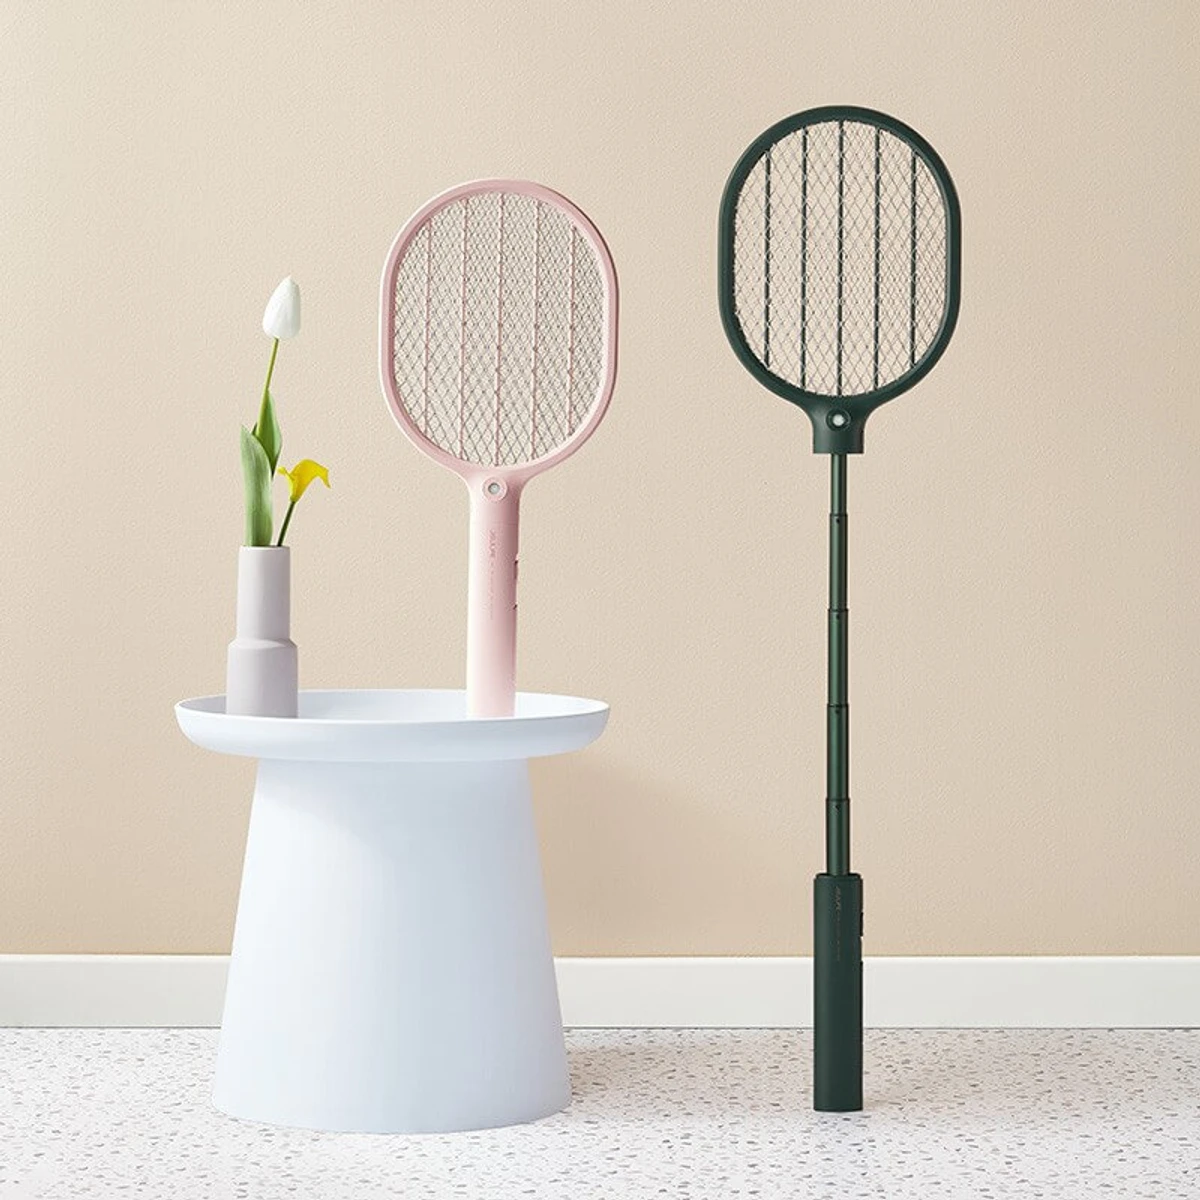 JISULIFE Retractable Mosquito SWATTER MS01